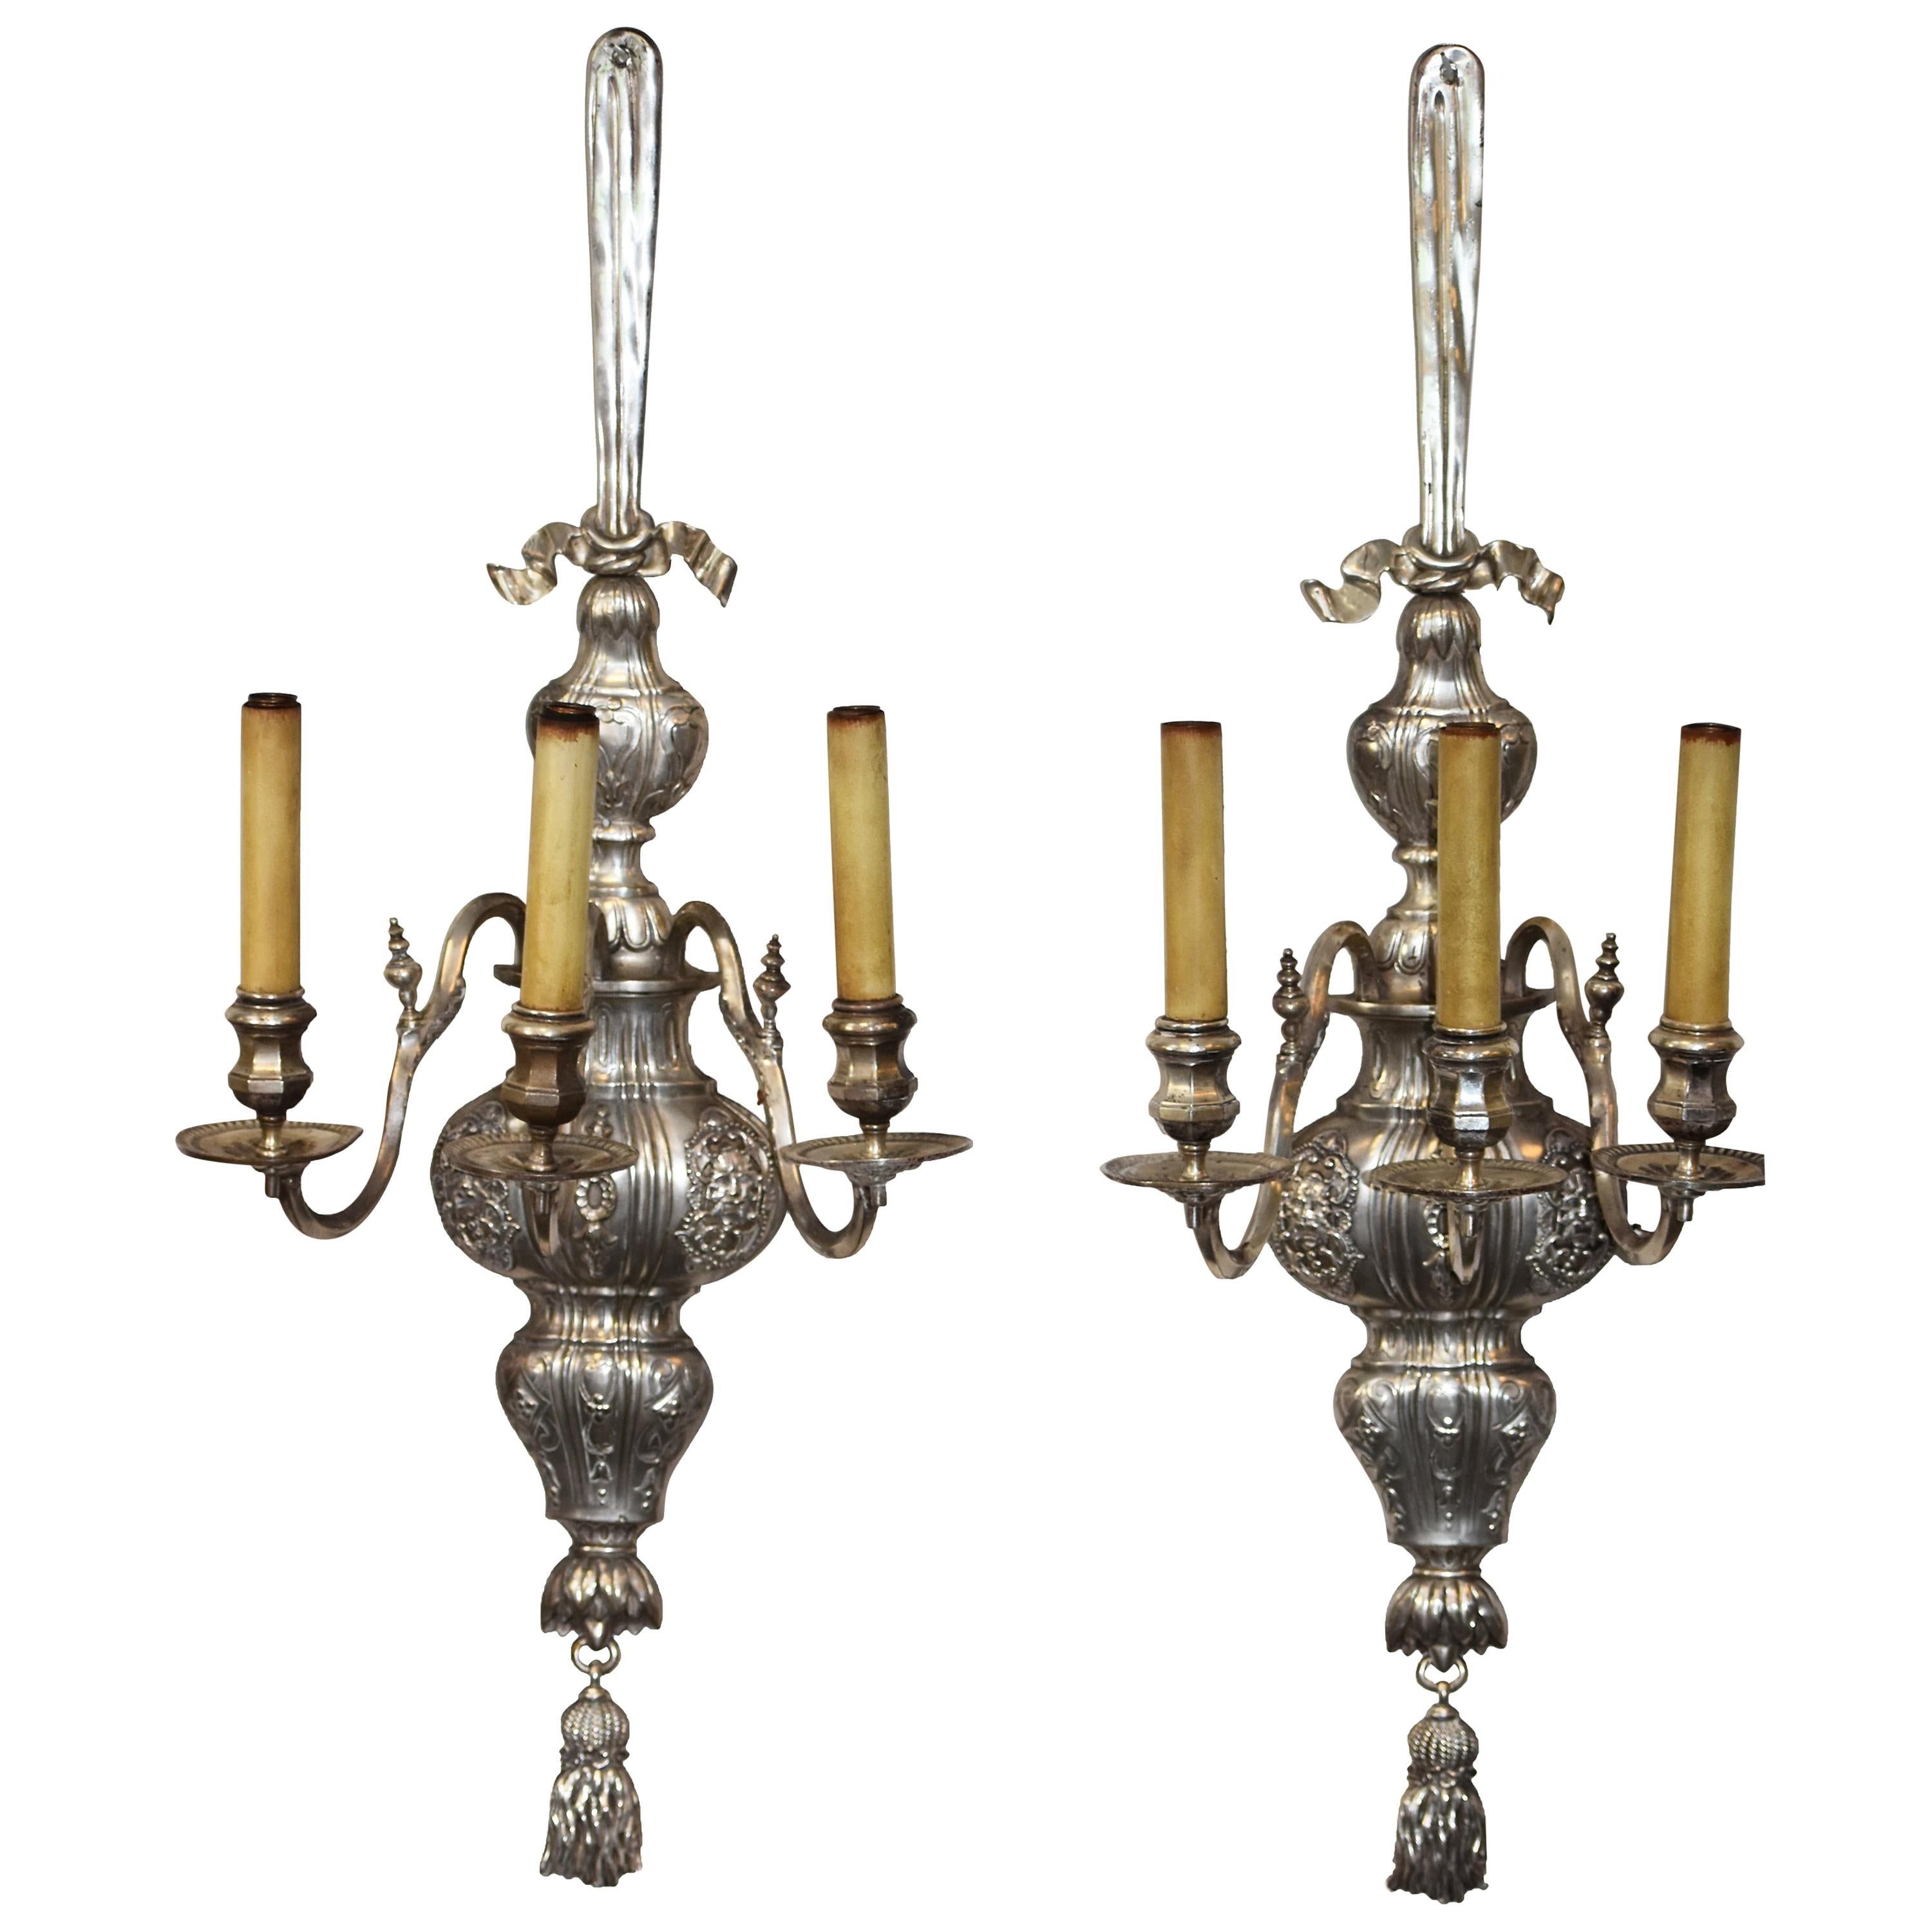 A Pair of Silvered Three Arm Sconces by E. F. Caldwel, 42" High For Sale